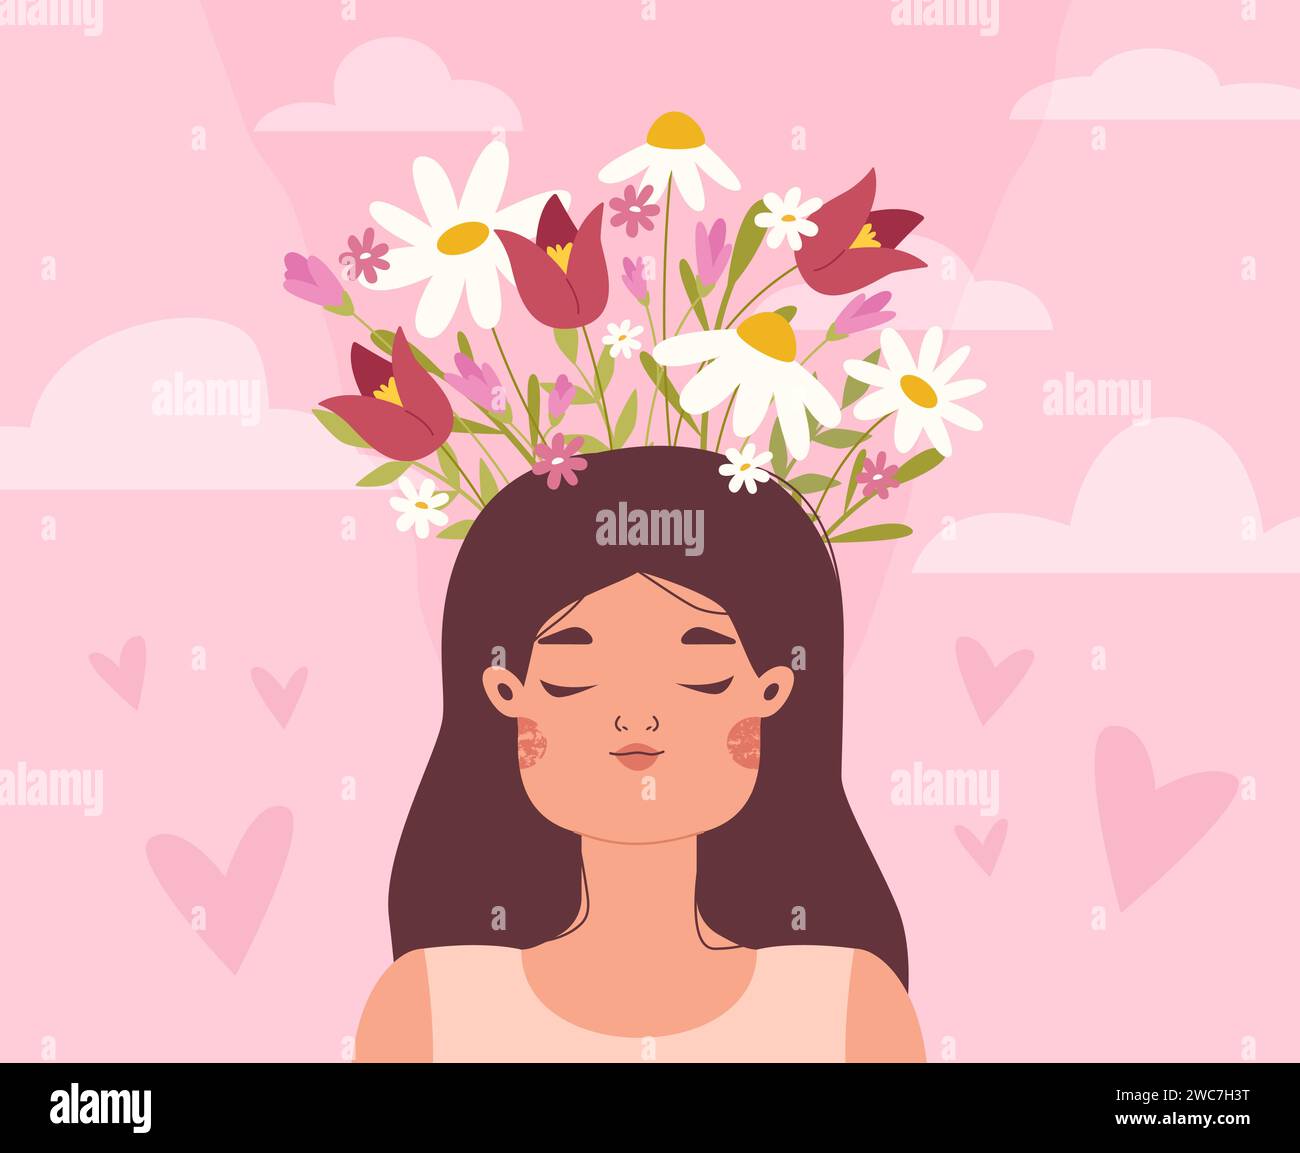 Female mental health. Young woman recovery brain or mind. Girl positive thinking, depression and sadness treatment. Keep calm snugly vector scene Stock Vector